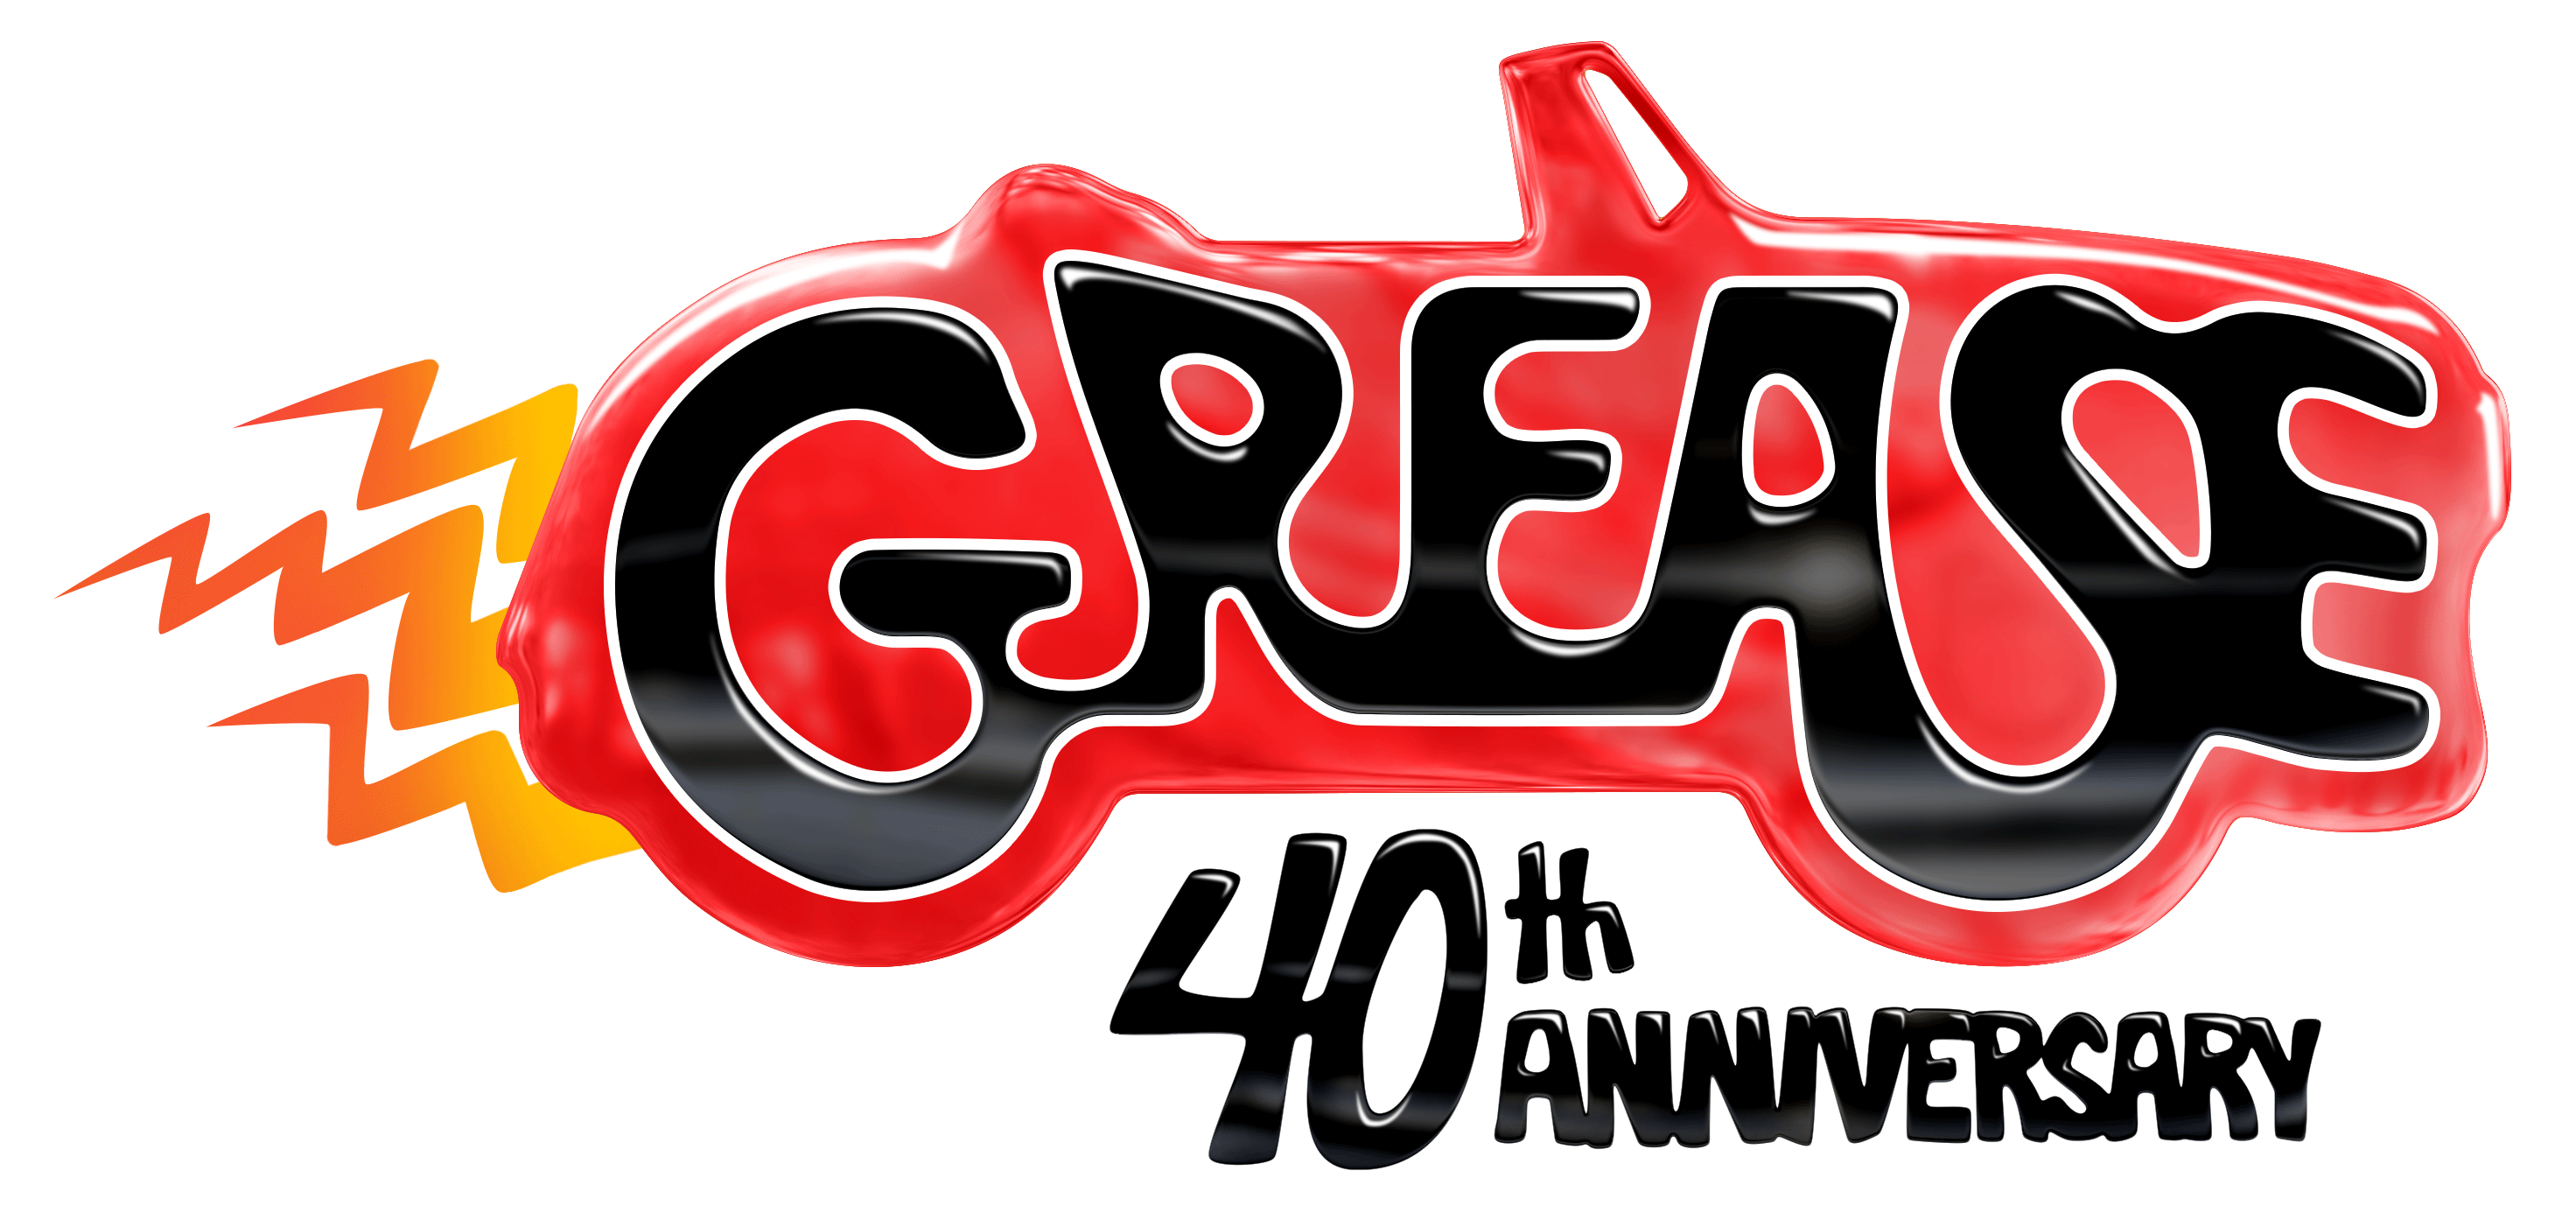 Grease Logo - The School of Sock Grease Logo Black, Gray, Red and Blue